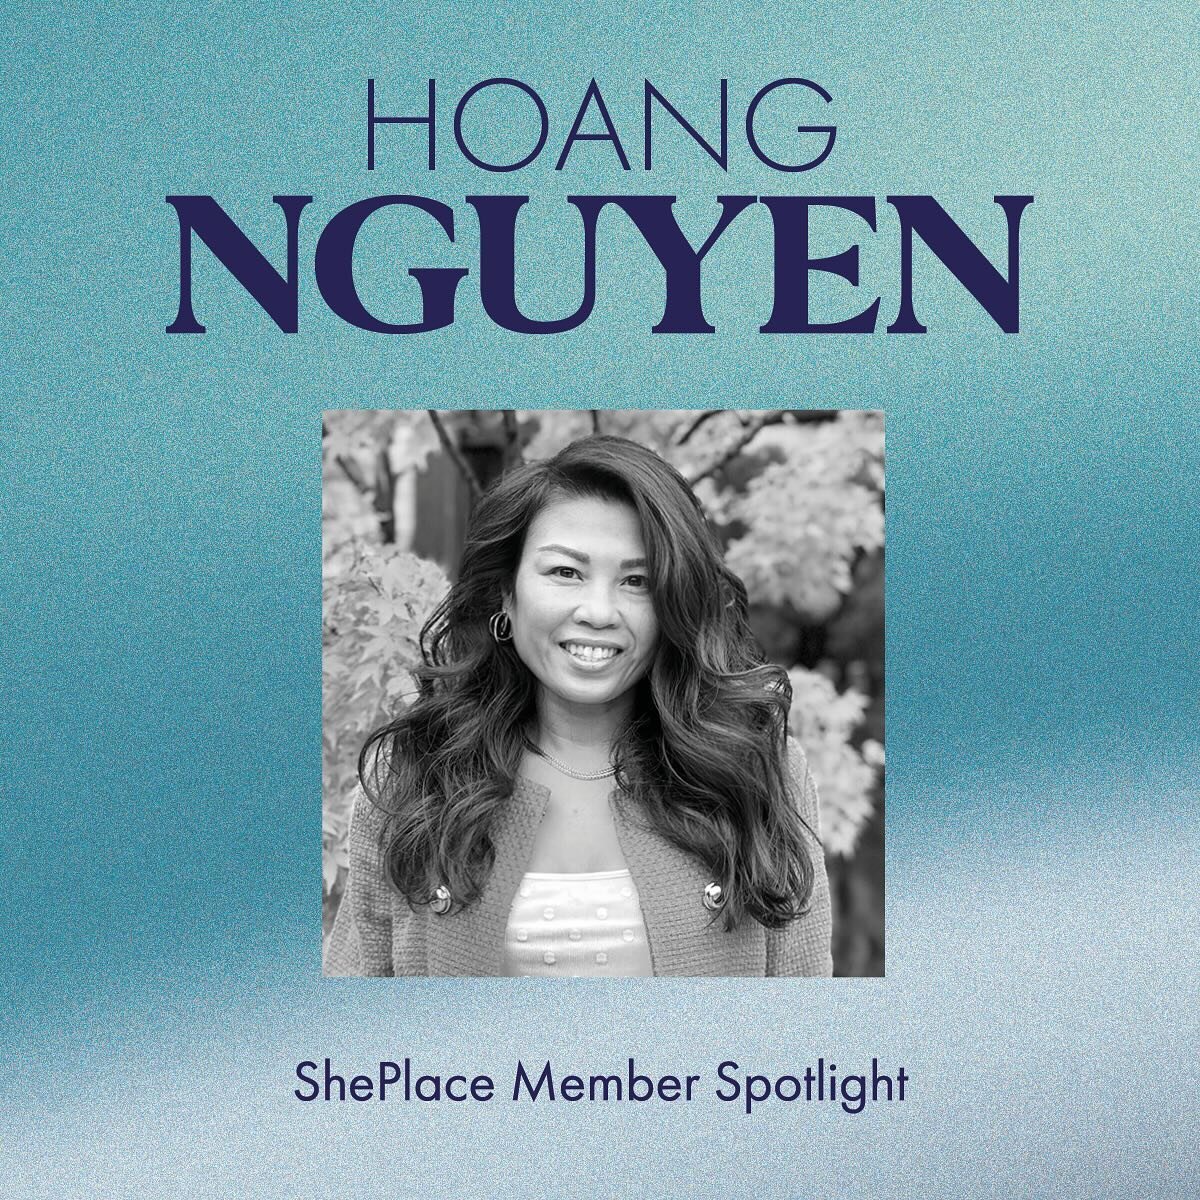 Meet this week&rsquo;s featured community spotlight,  @hoangforhouse23 !

Hoang Nguyen is the Managing Partner of Sapa Investments and the Chief Executive Officer of Holding Dragons, a vertically integrated medical cannabis company in Utah. Hoang com